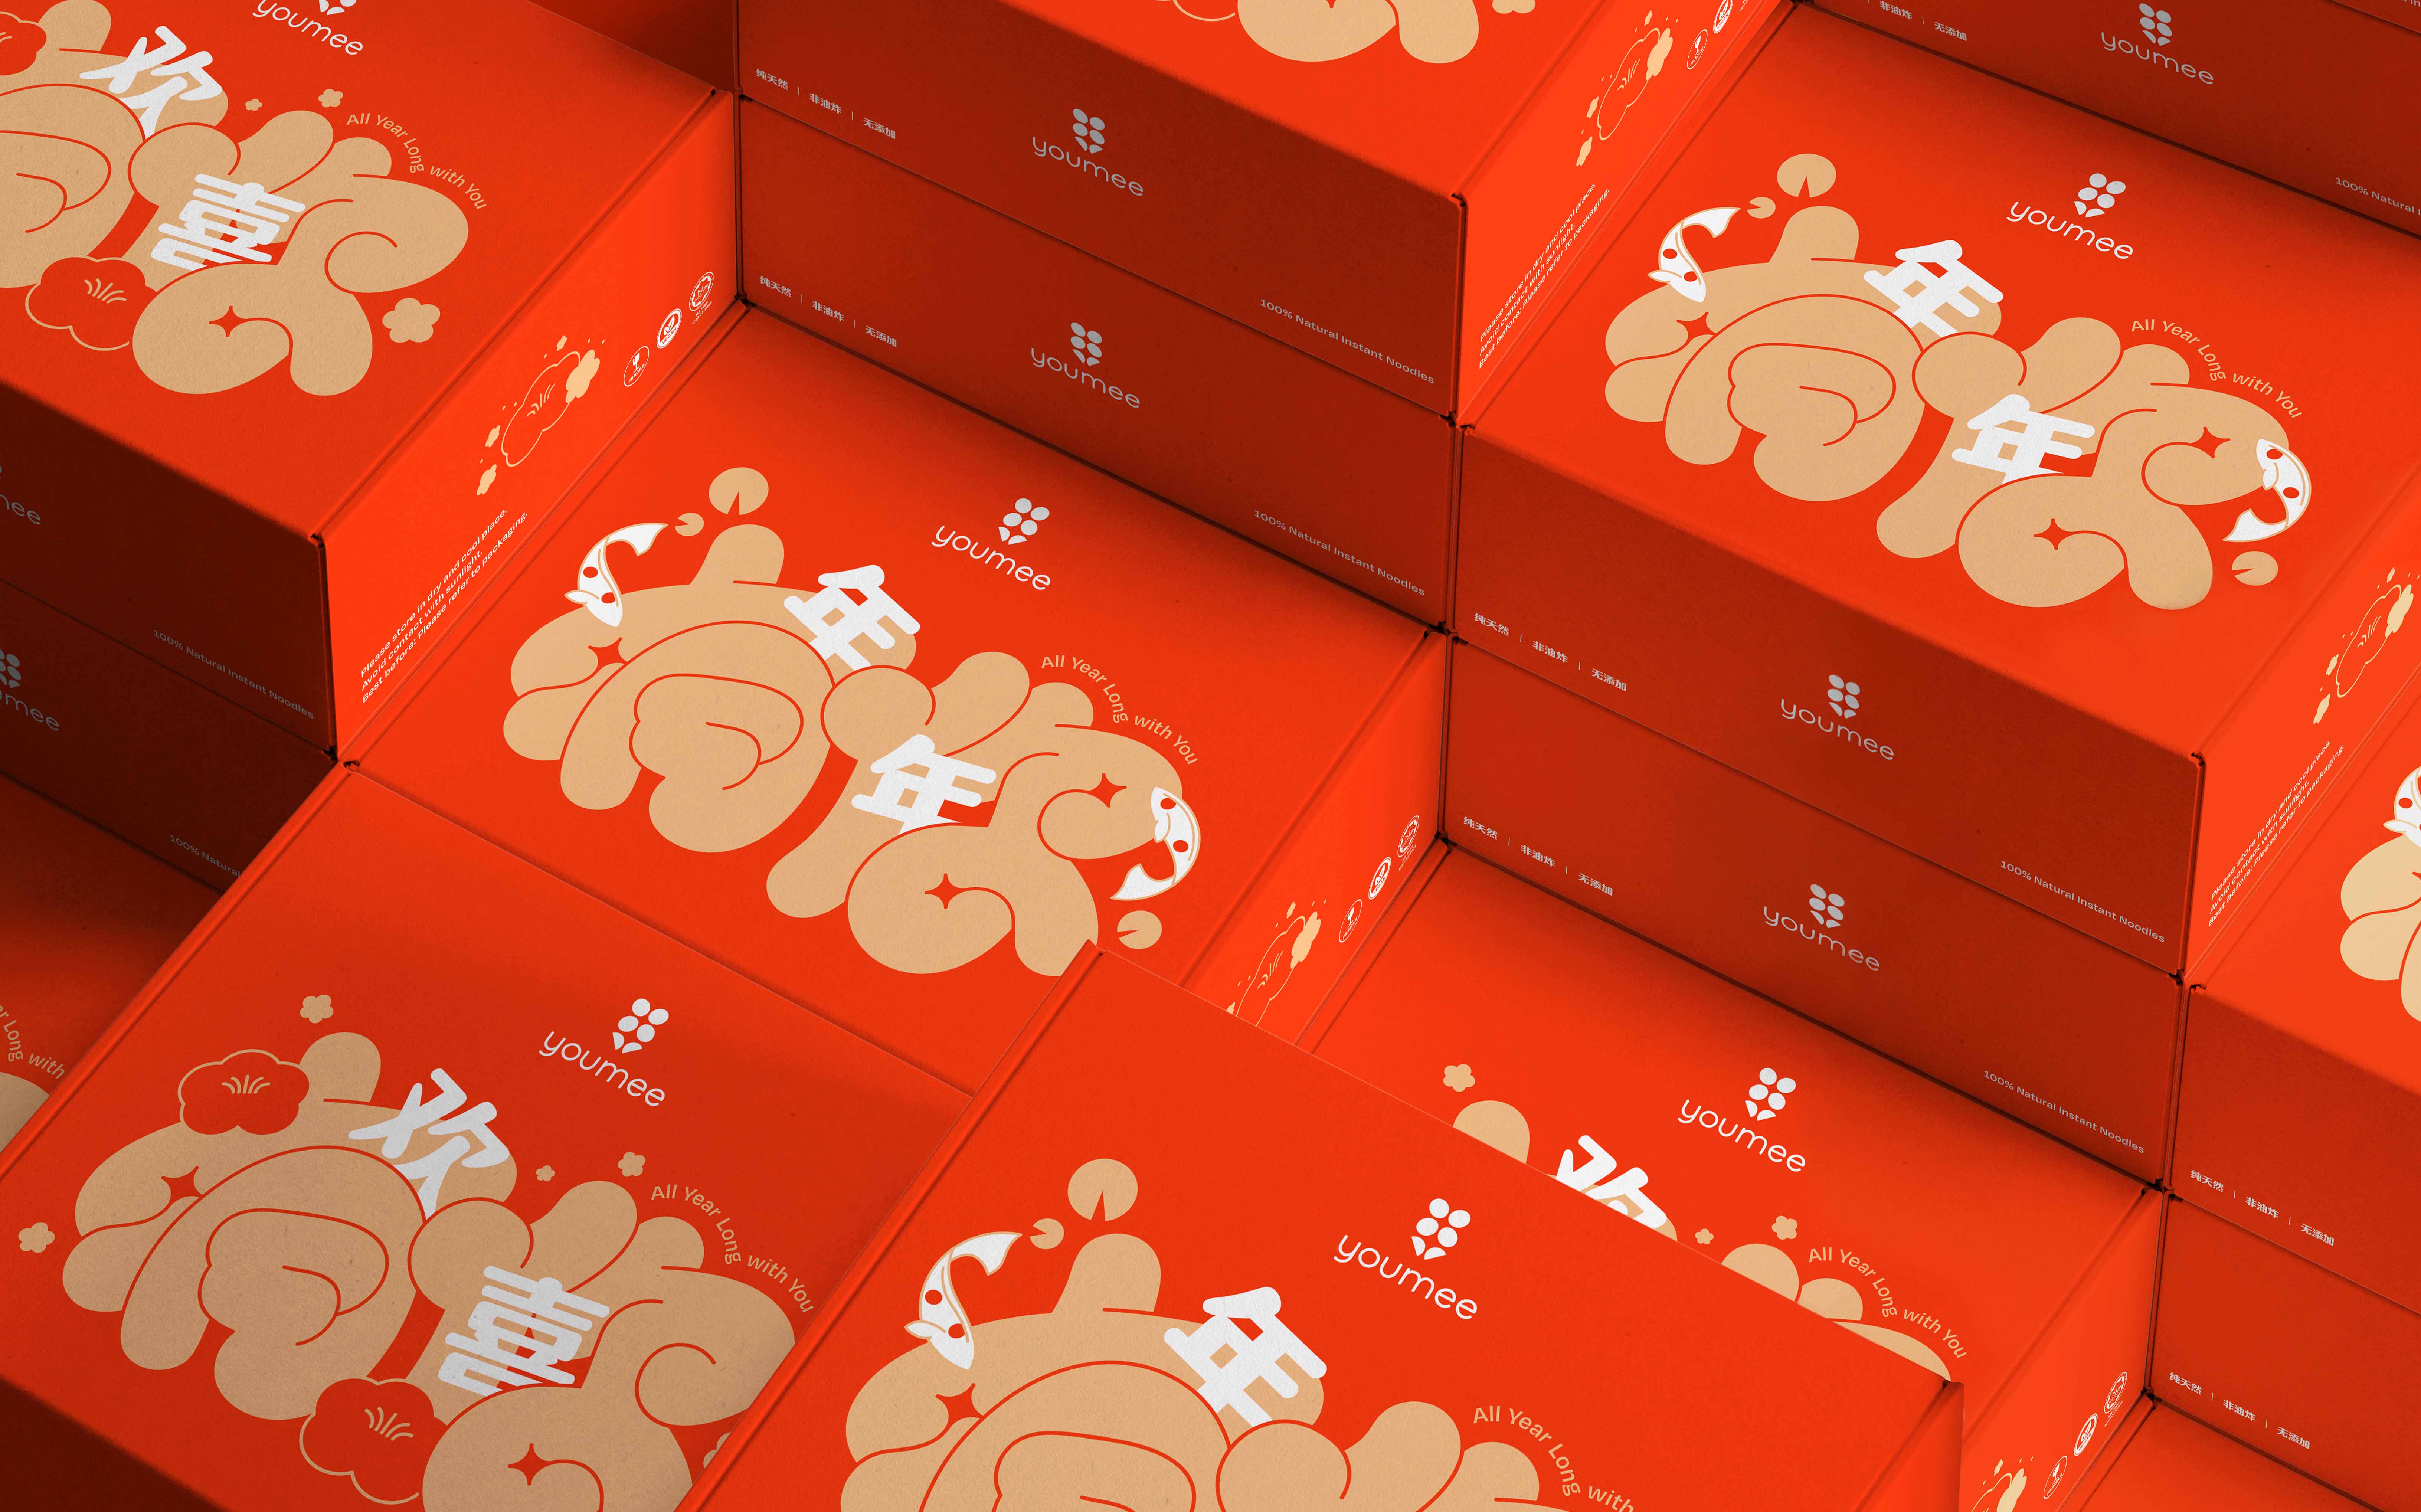 Youmee Lunar New Year Gift Box Packaging Design